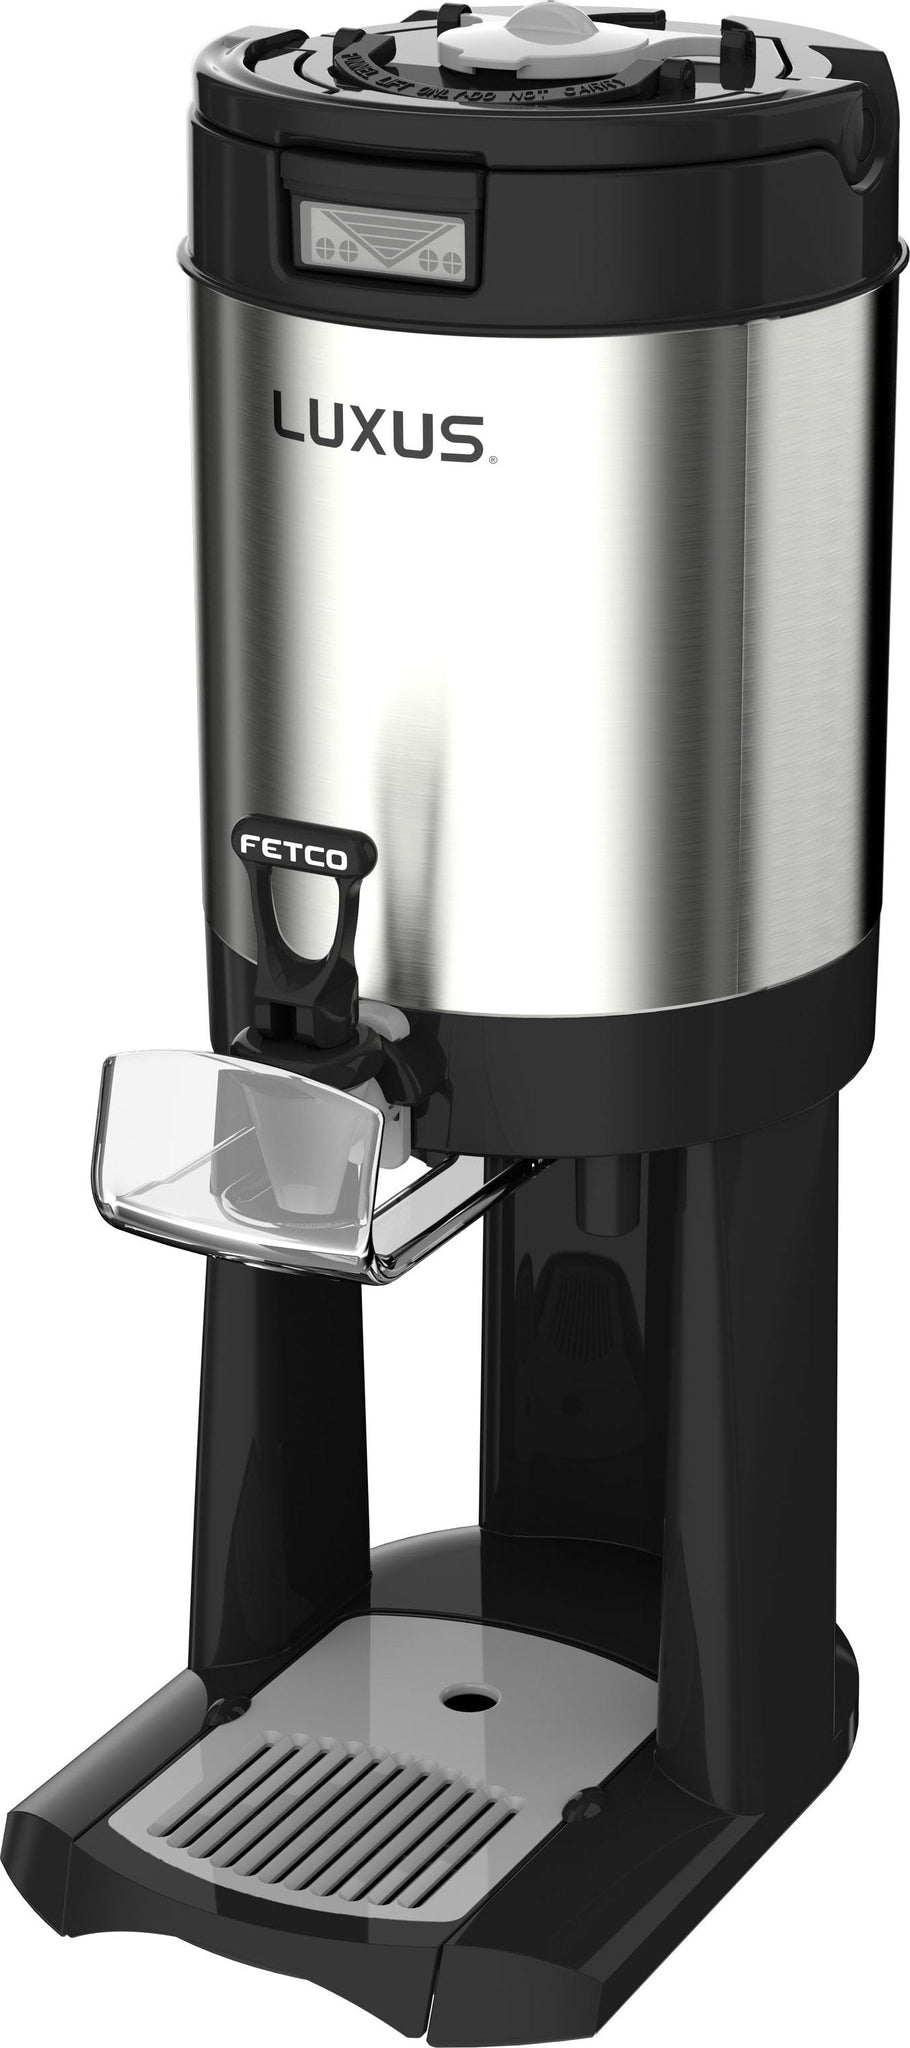 Fetco - 3.8 L LUXUS Thermal Dispenser with Stand - L4D-10